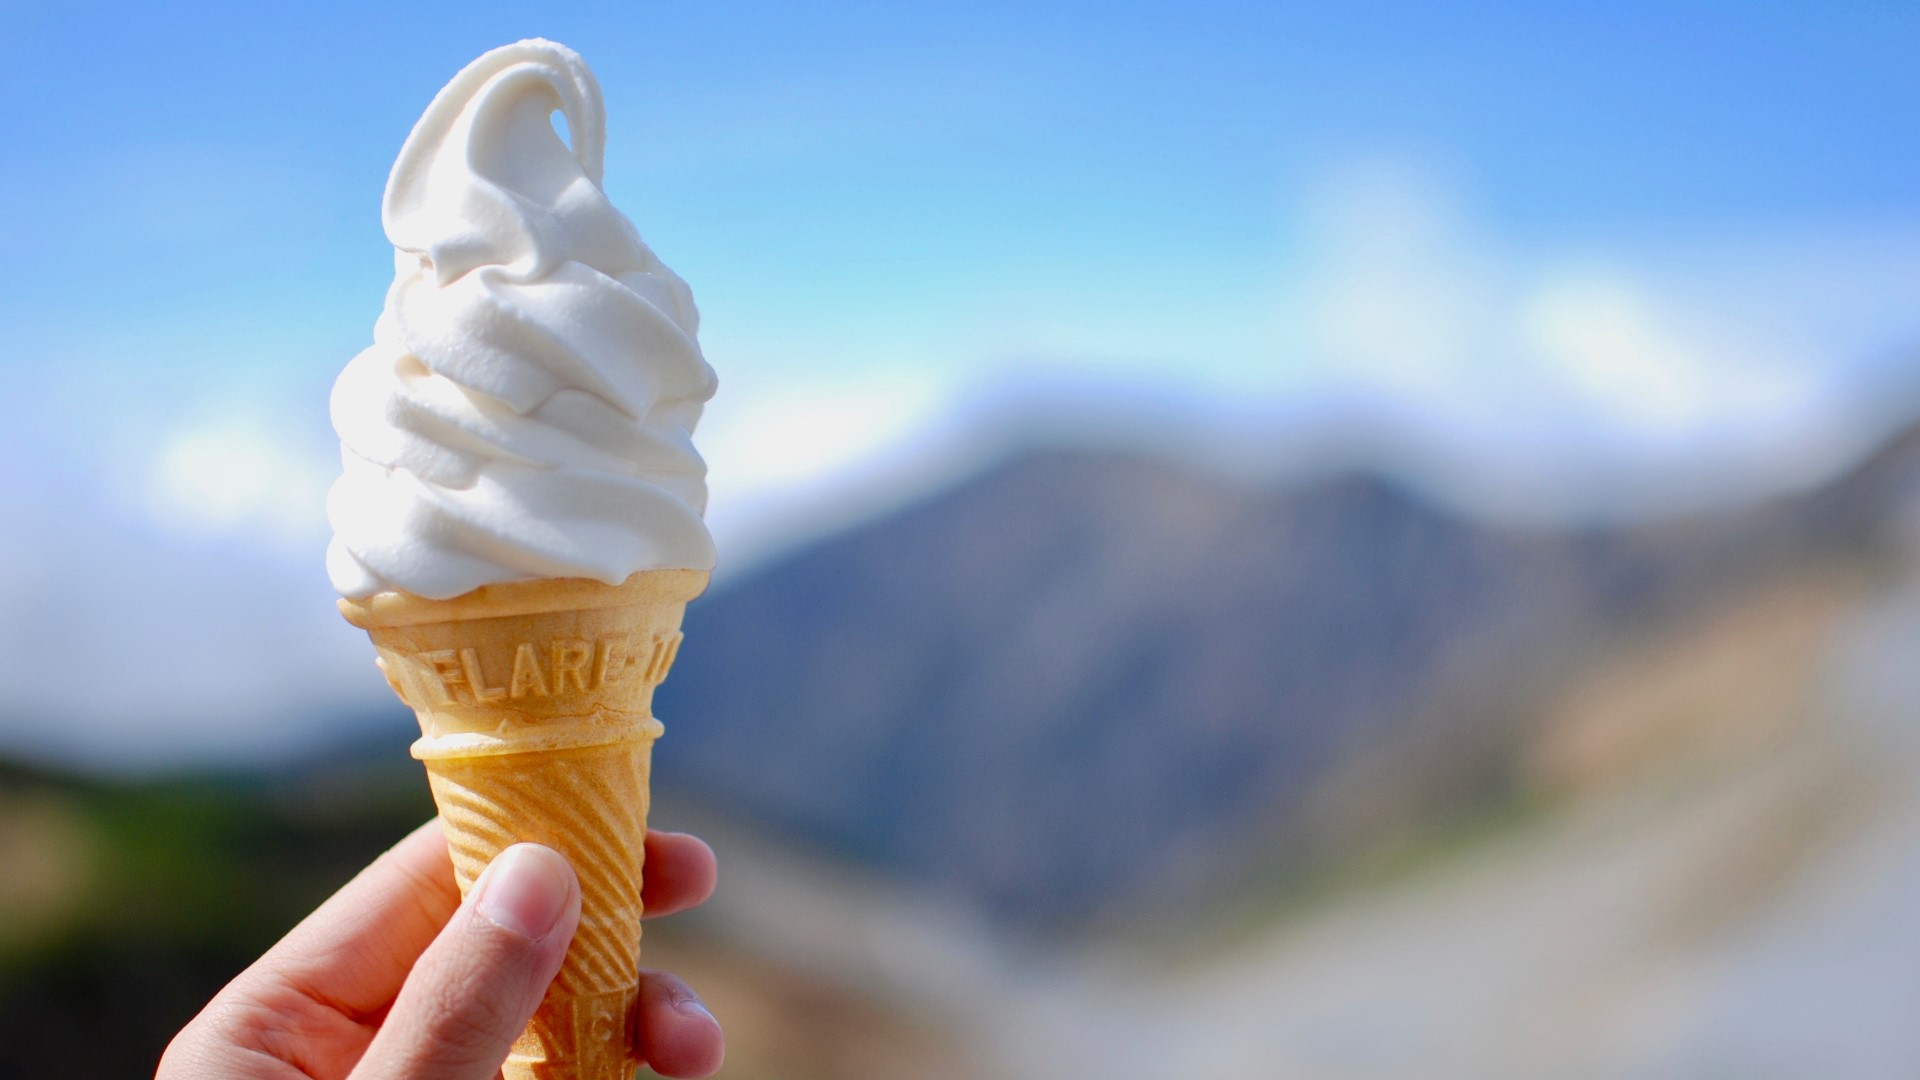 Dairy Queen brings back its "Free Cone Day" on Monday, March 20, 2023.